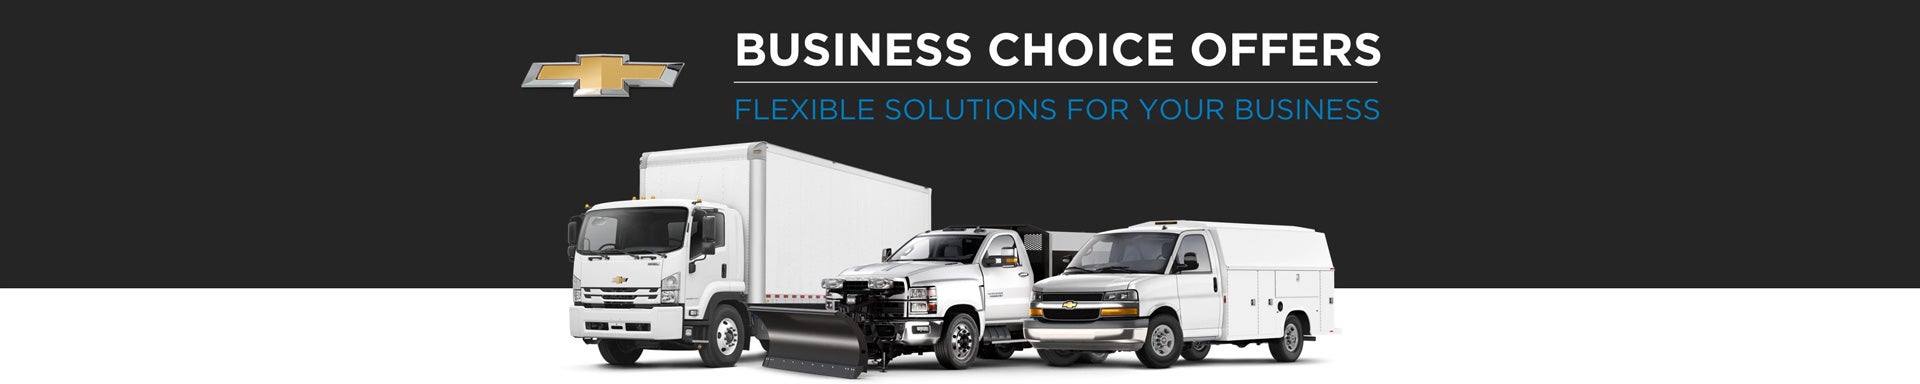 Chevrolet Business Choice Offers - Flexible Solutions for your Business - Burns Chevrolet in Rock Hill SC